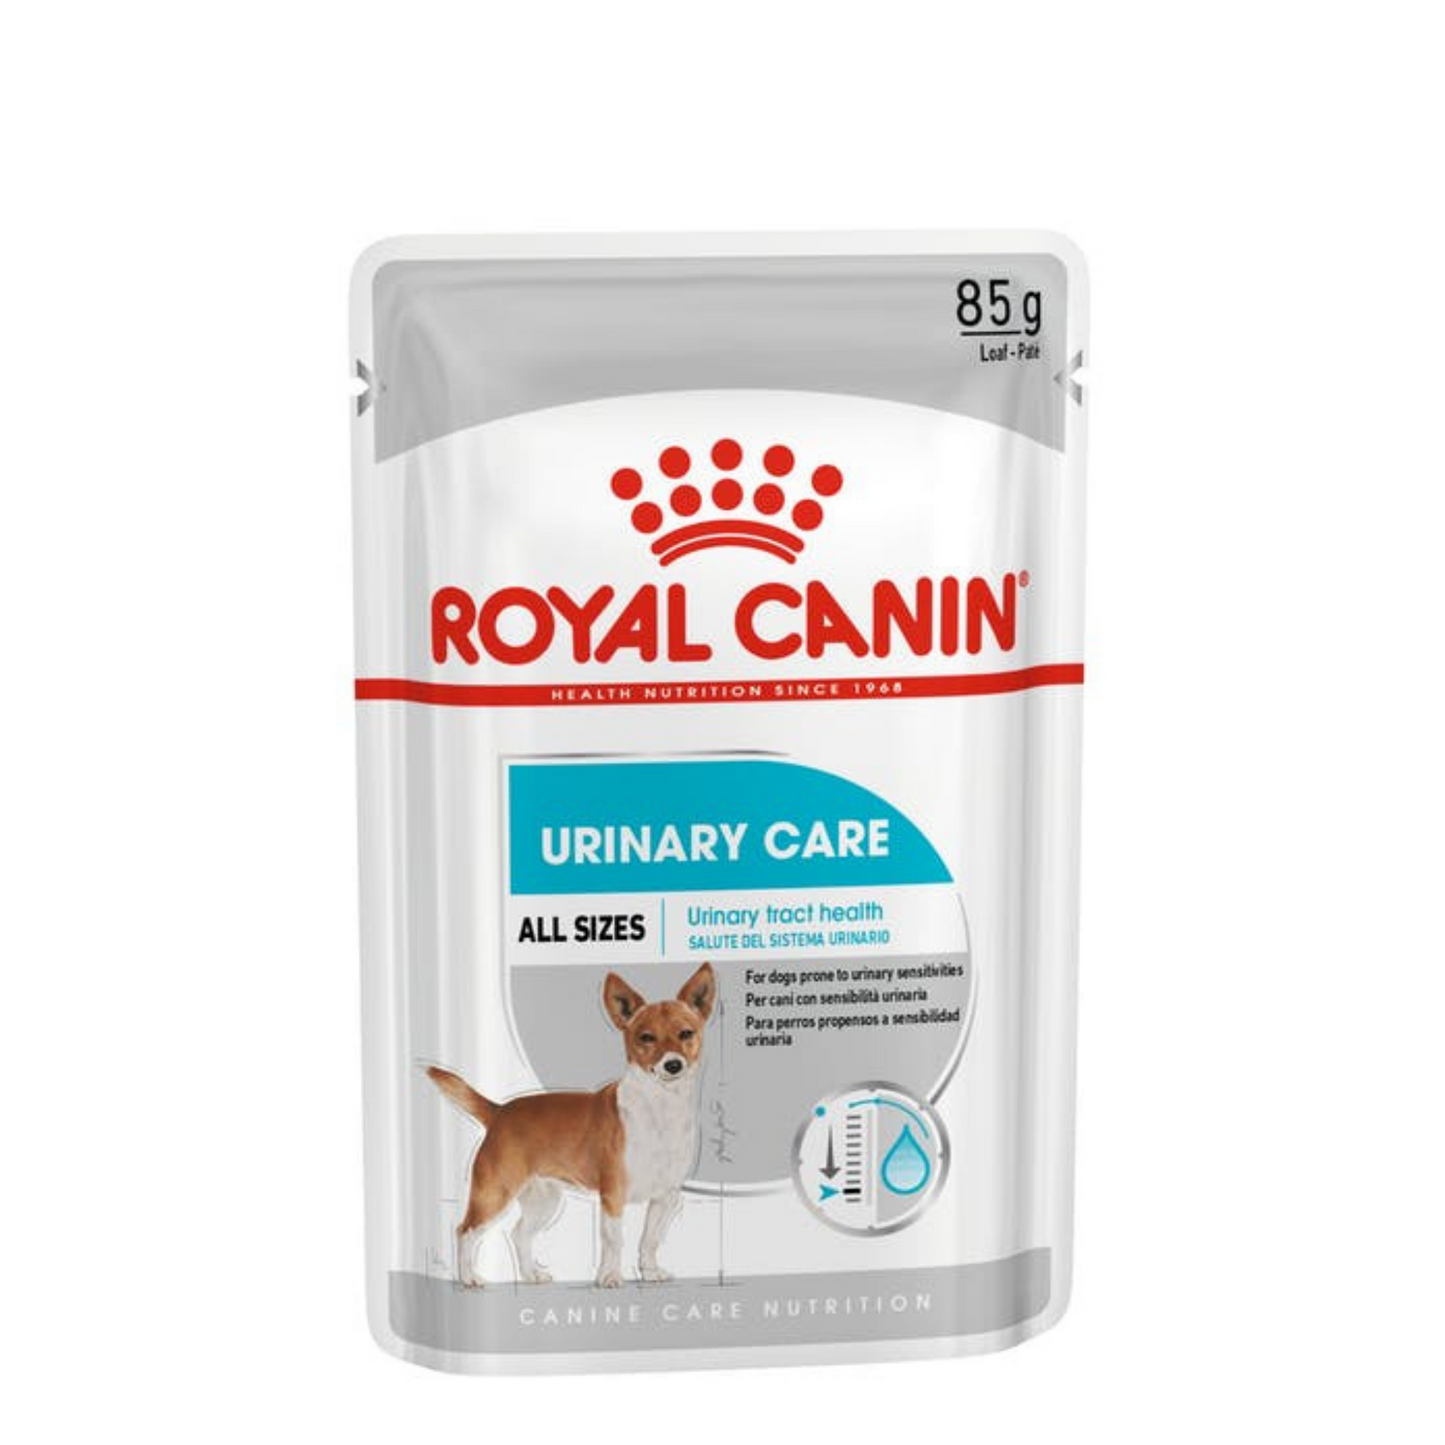 Royal Canin Urinary Care Wet